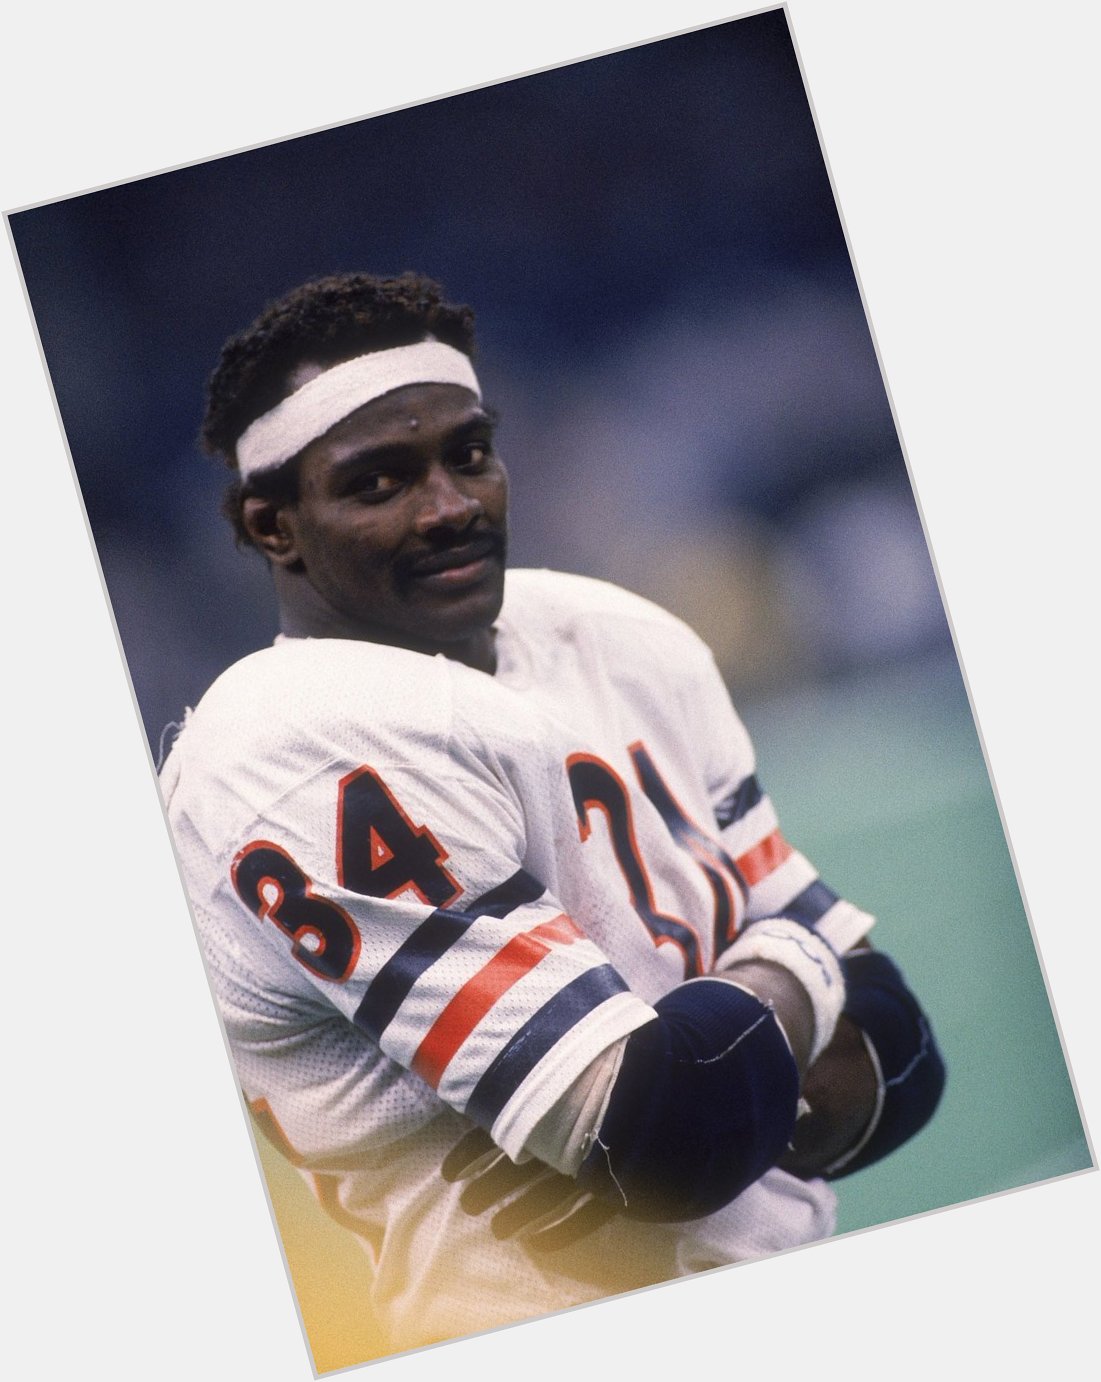 The Late, Great, , Walter Payton  would have turned 65 today.  HAPPY BIRTHDAY, SWEETNESS RIP    